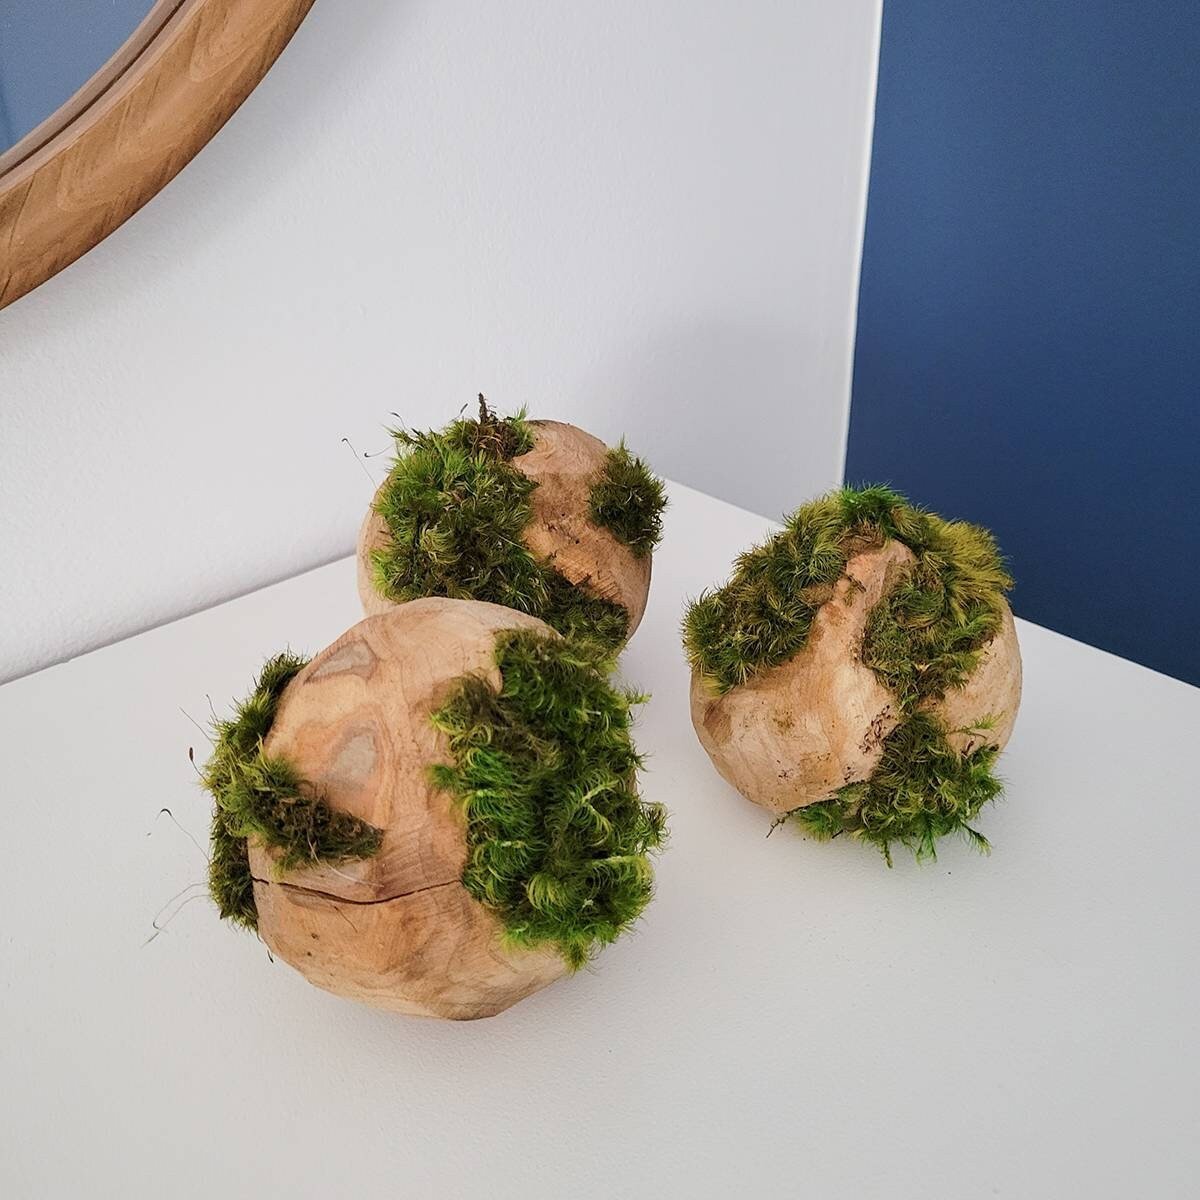 Preserved Moss hugging wooden carved orbs - Mossy Moss by Olia